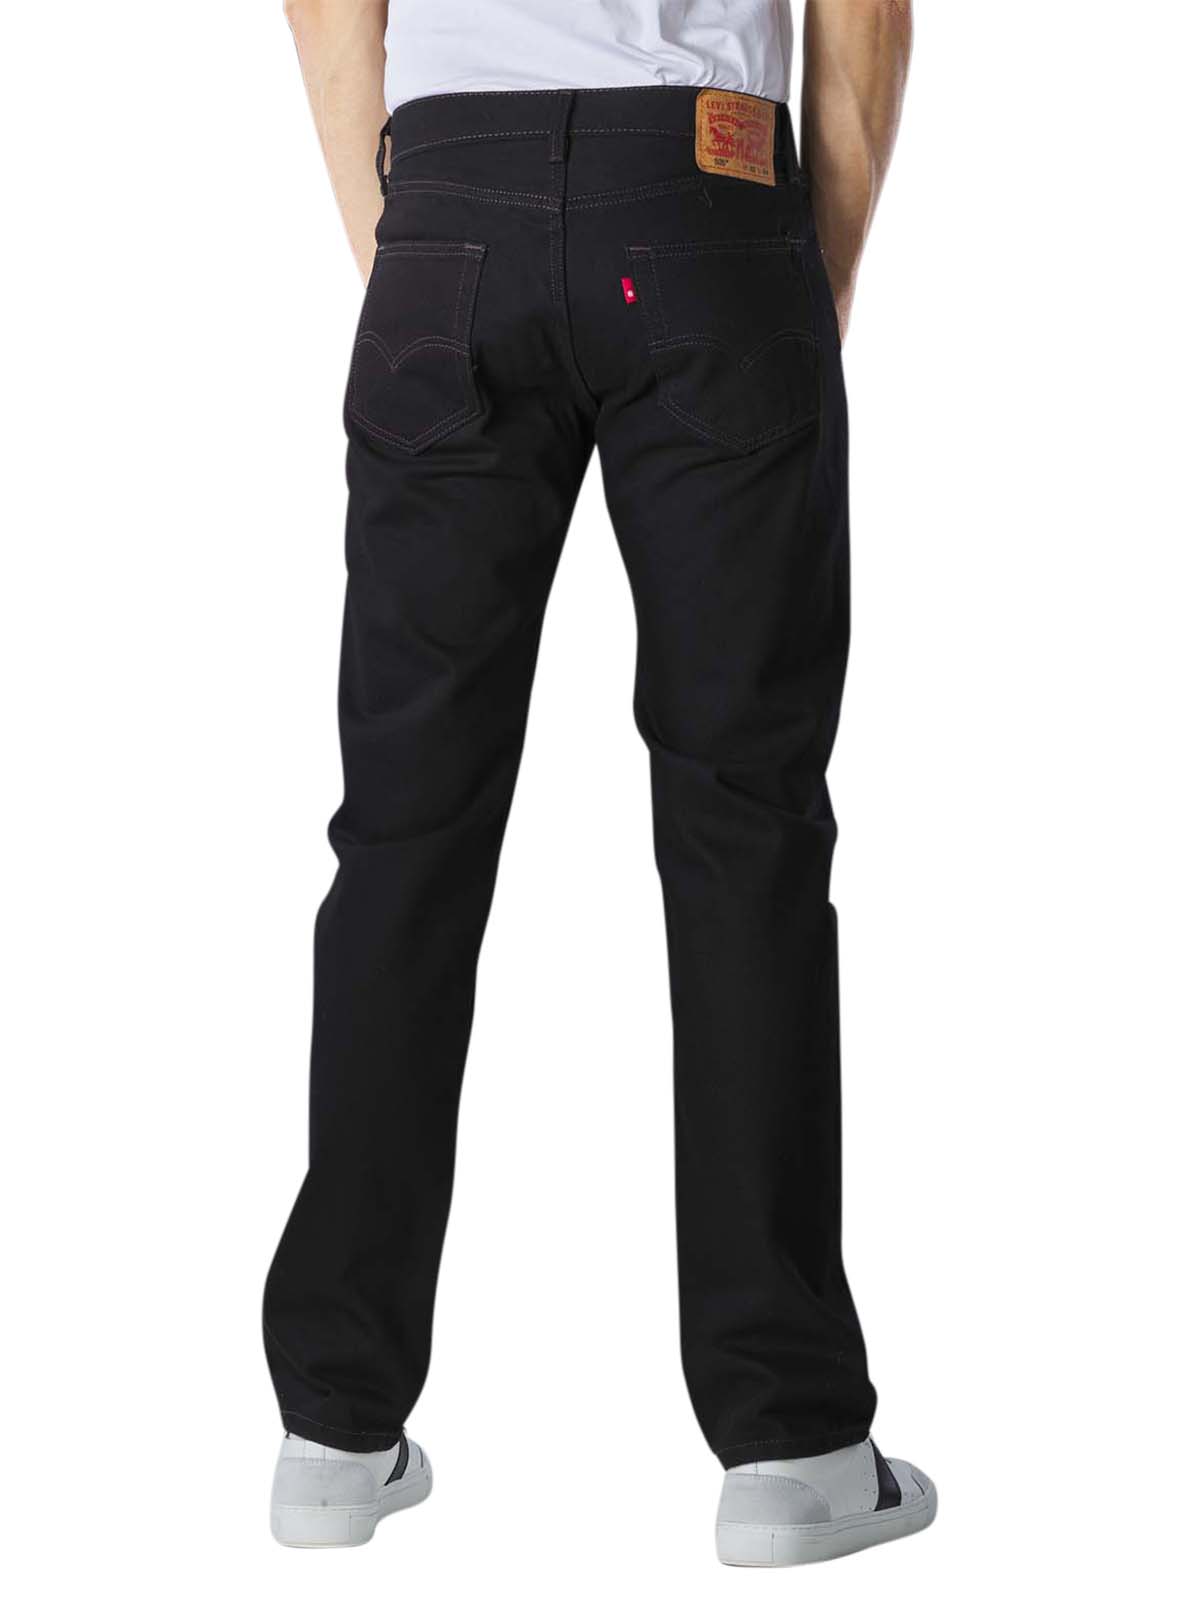 Levi's 505 Jeans black/black (zip) Levi's Men's Jeans | Free Shipping on   - SIMPLY LOOK GOOD